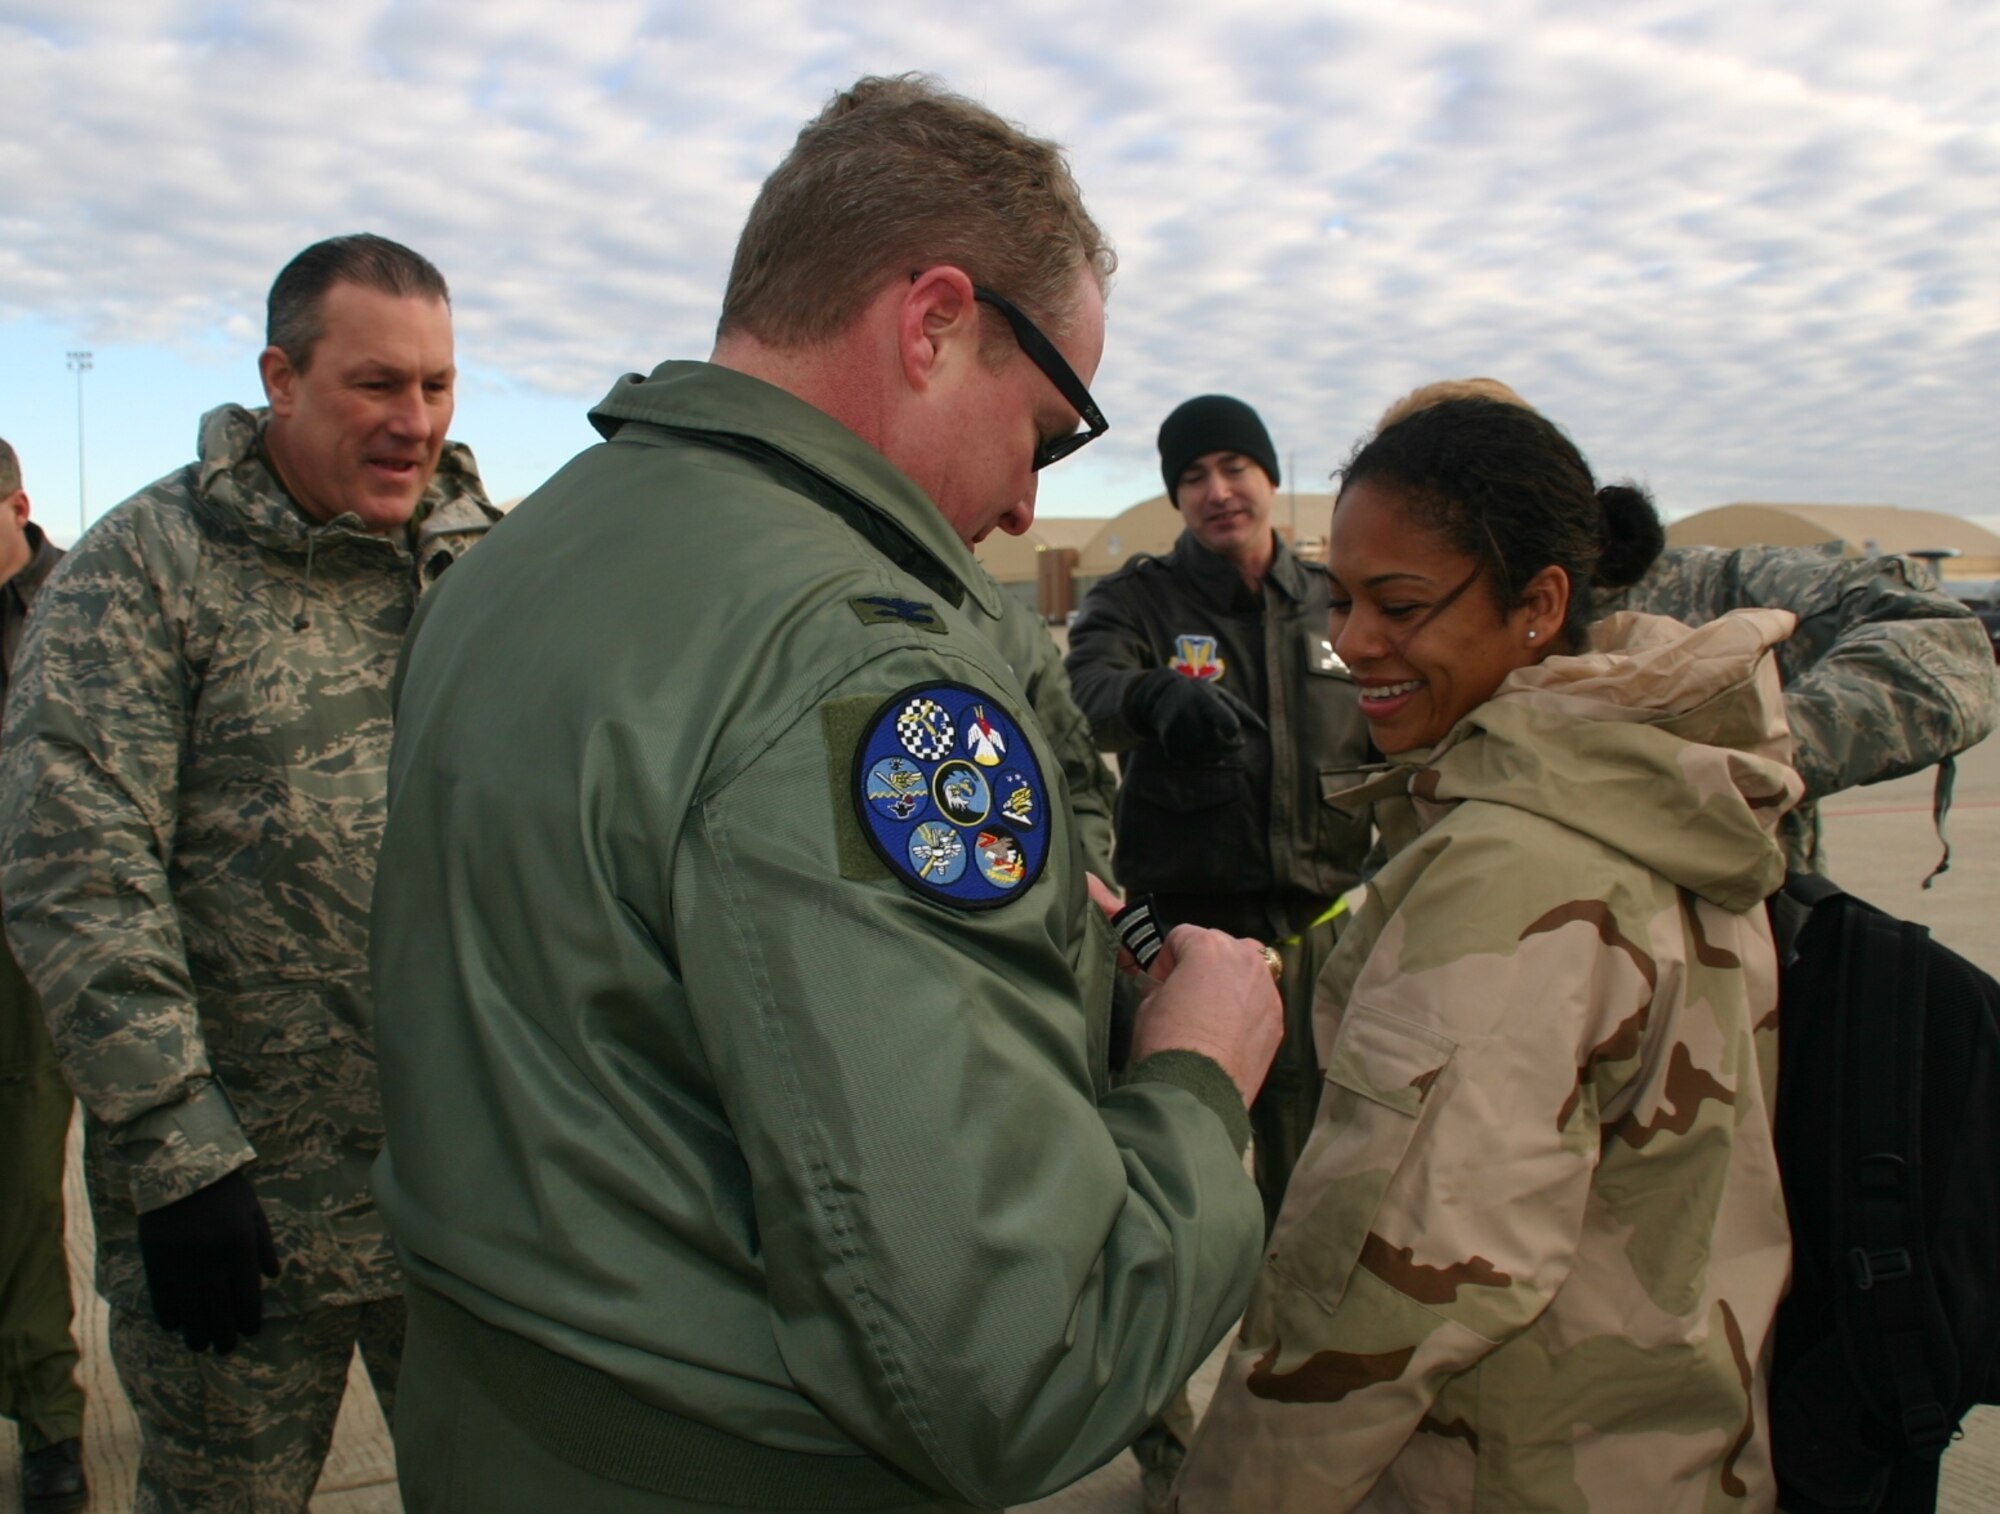 Staff Sergeant Nicole Copeland, 552nd Operations Support Squadron, is awarded her stripe by Col. George Carpenter, commander, 552nd Operations Group, as she disembarked the jet that brought her back from her latest deployment January 14, 2009. 